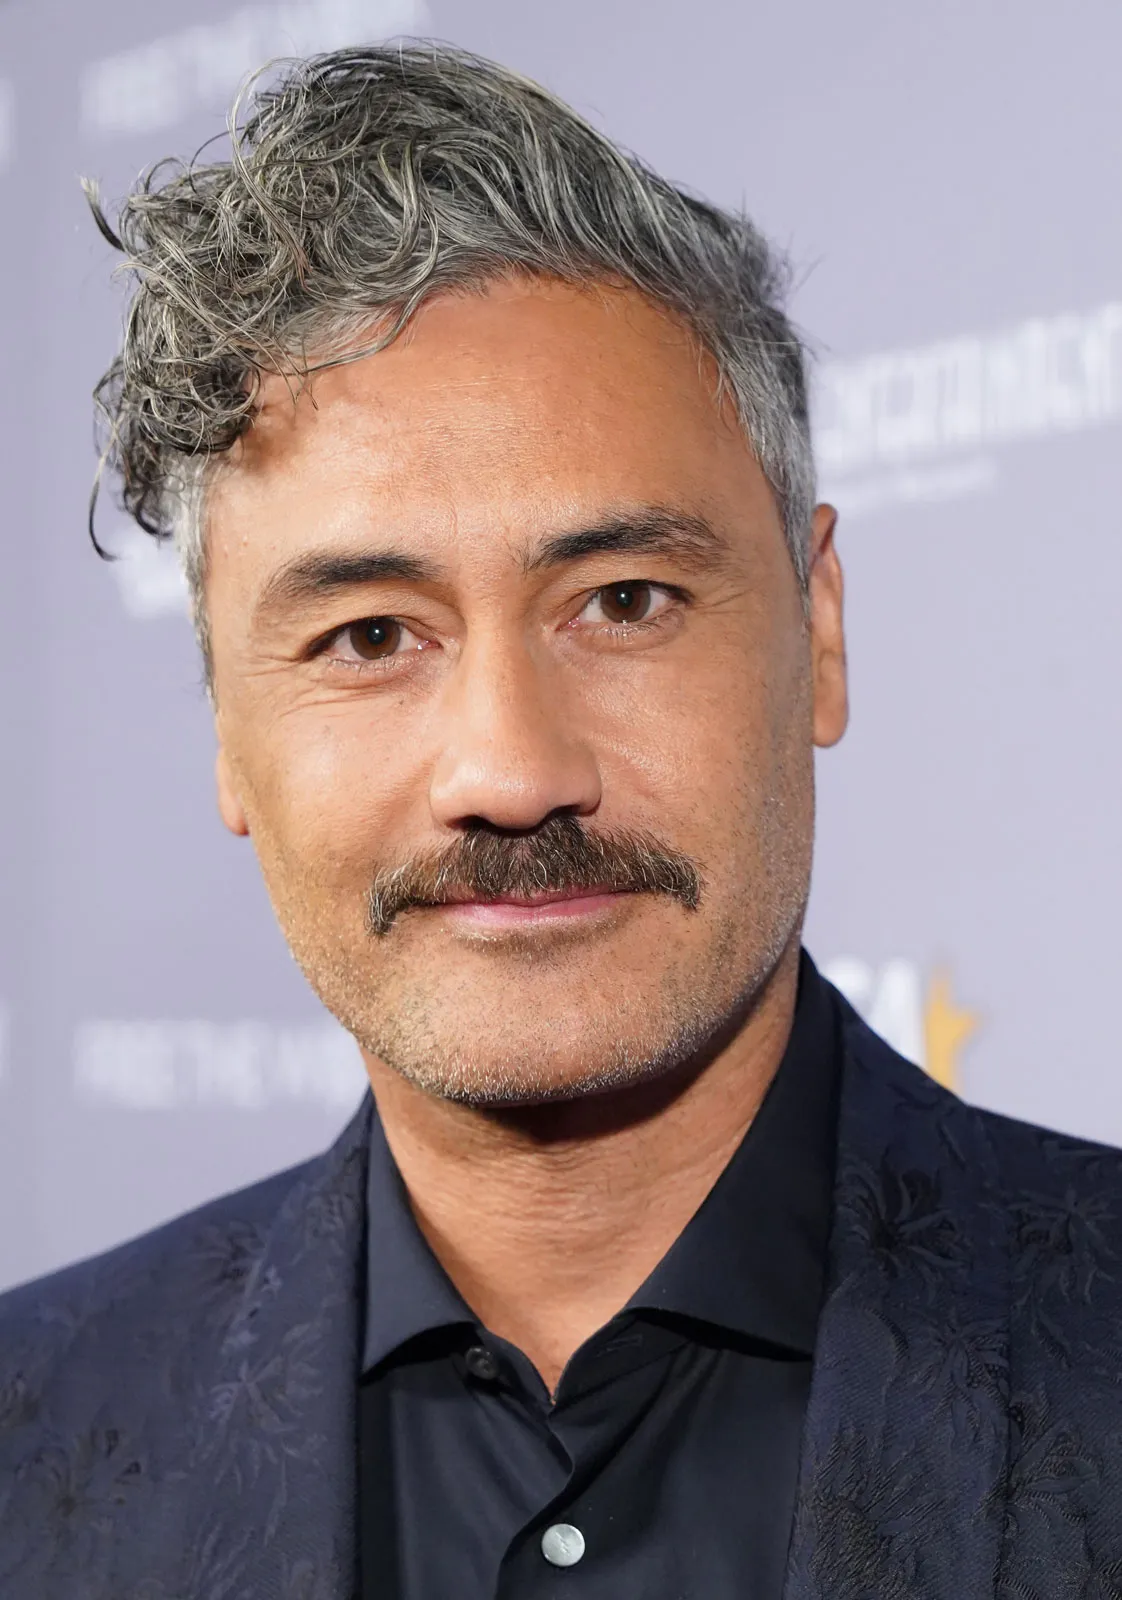 Want to check out some quick biographical facts about Taika